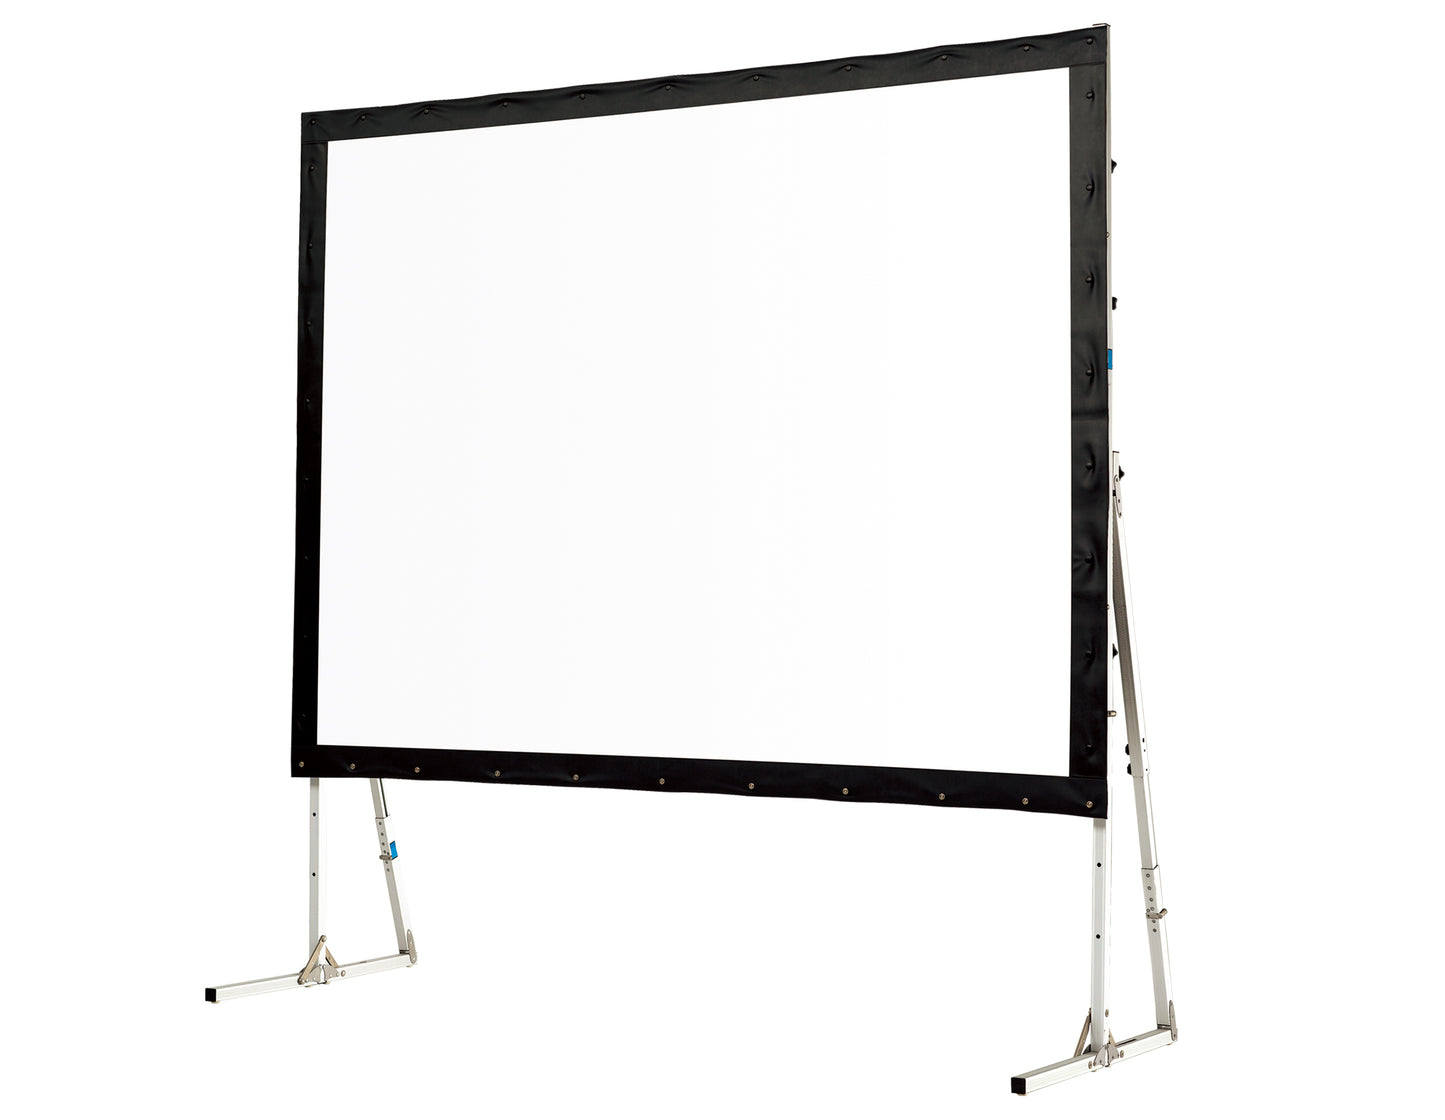 Grandview 120" 16:9 Super Mobile Fastfold Frame, case and legs